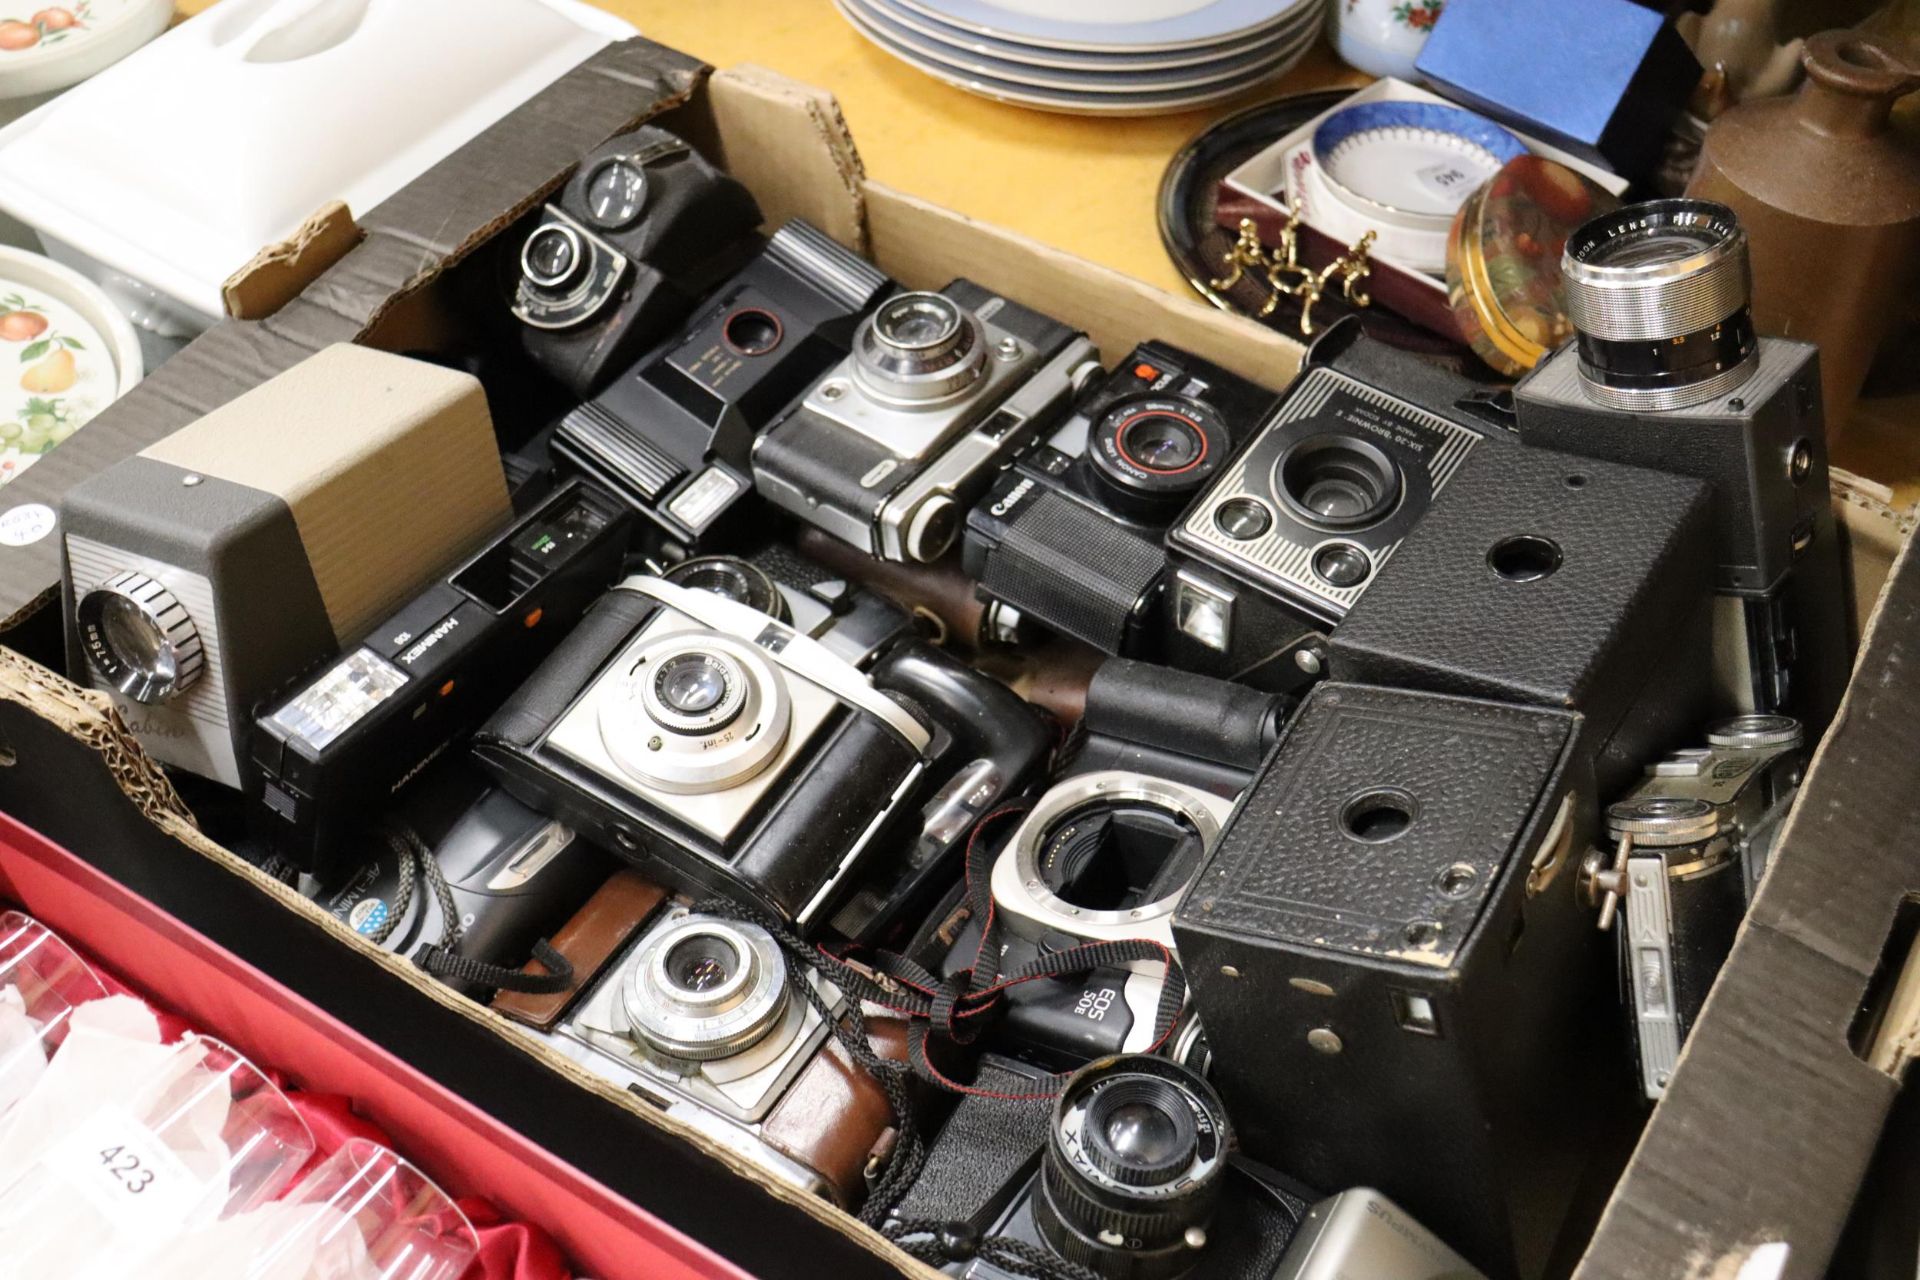 A LARGE QUANTITY OF VINTAGE CAMERAS TO INCLUDE CANON, ENSIGN, KODAK BROWNIE, ETC - 26 IN TOTAL - Image 8 of 9